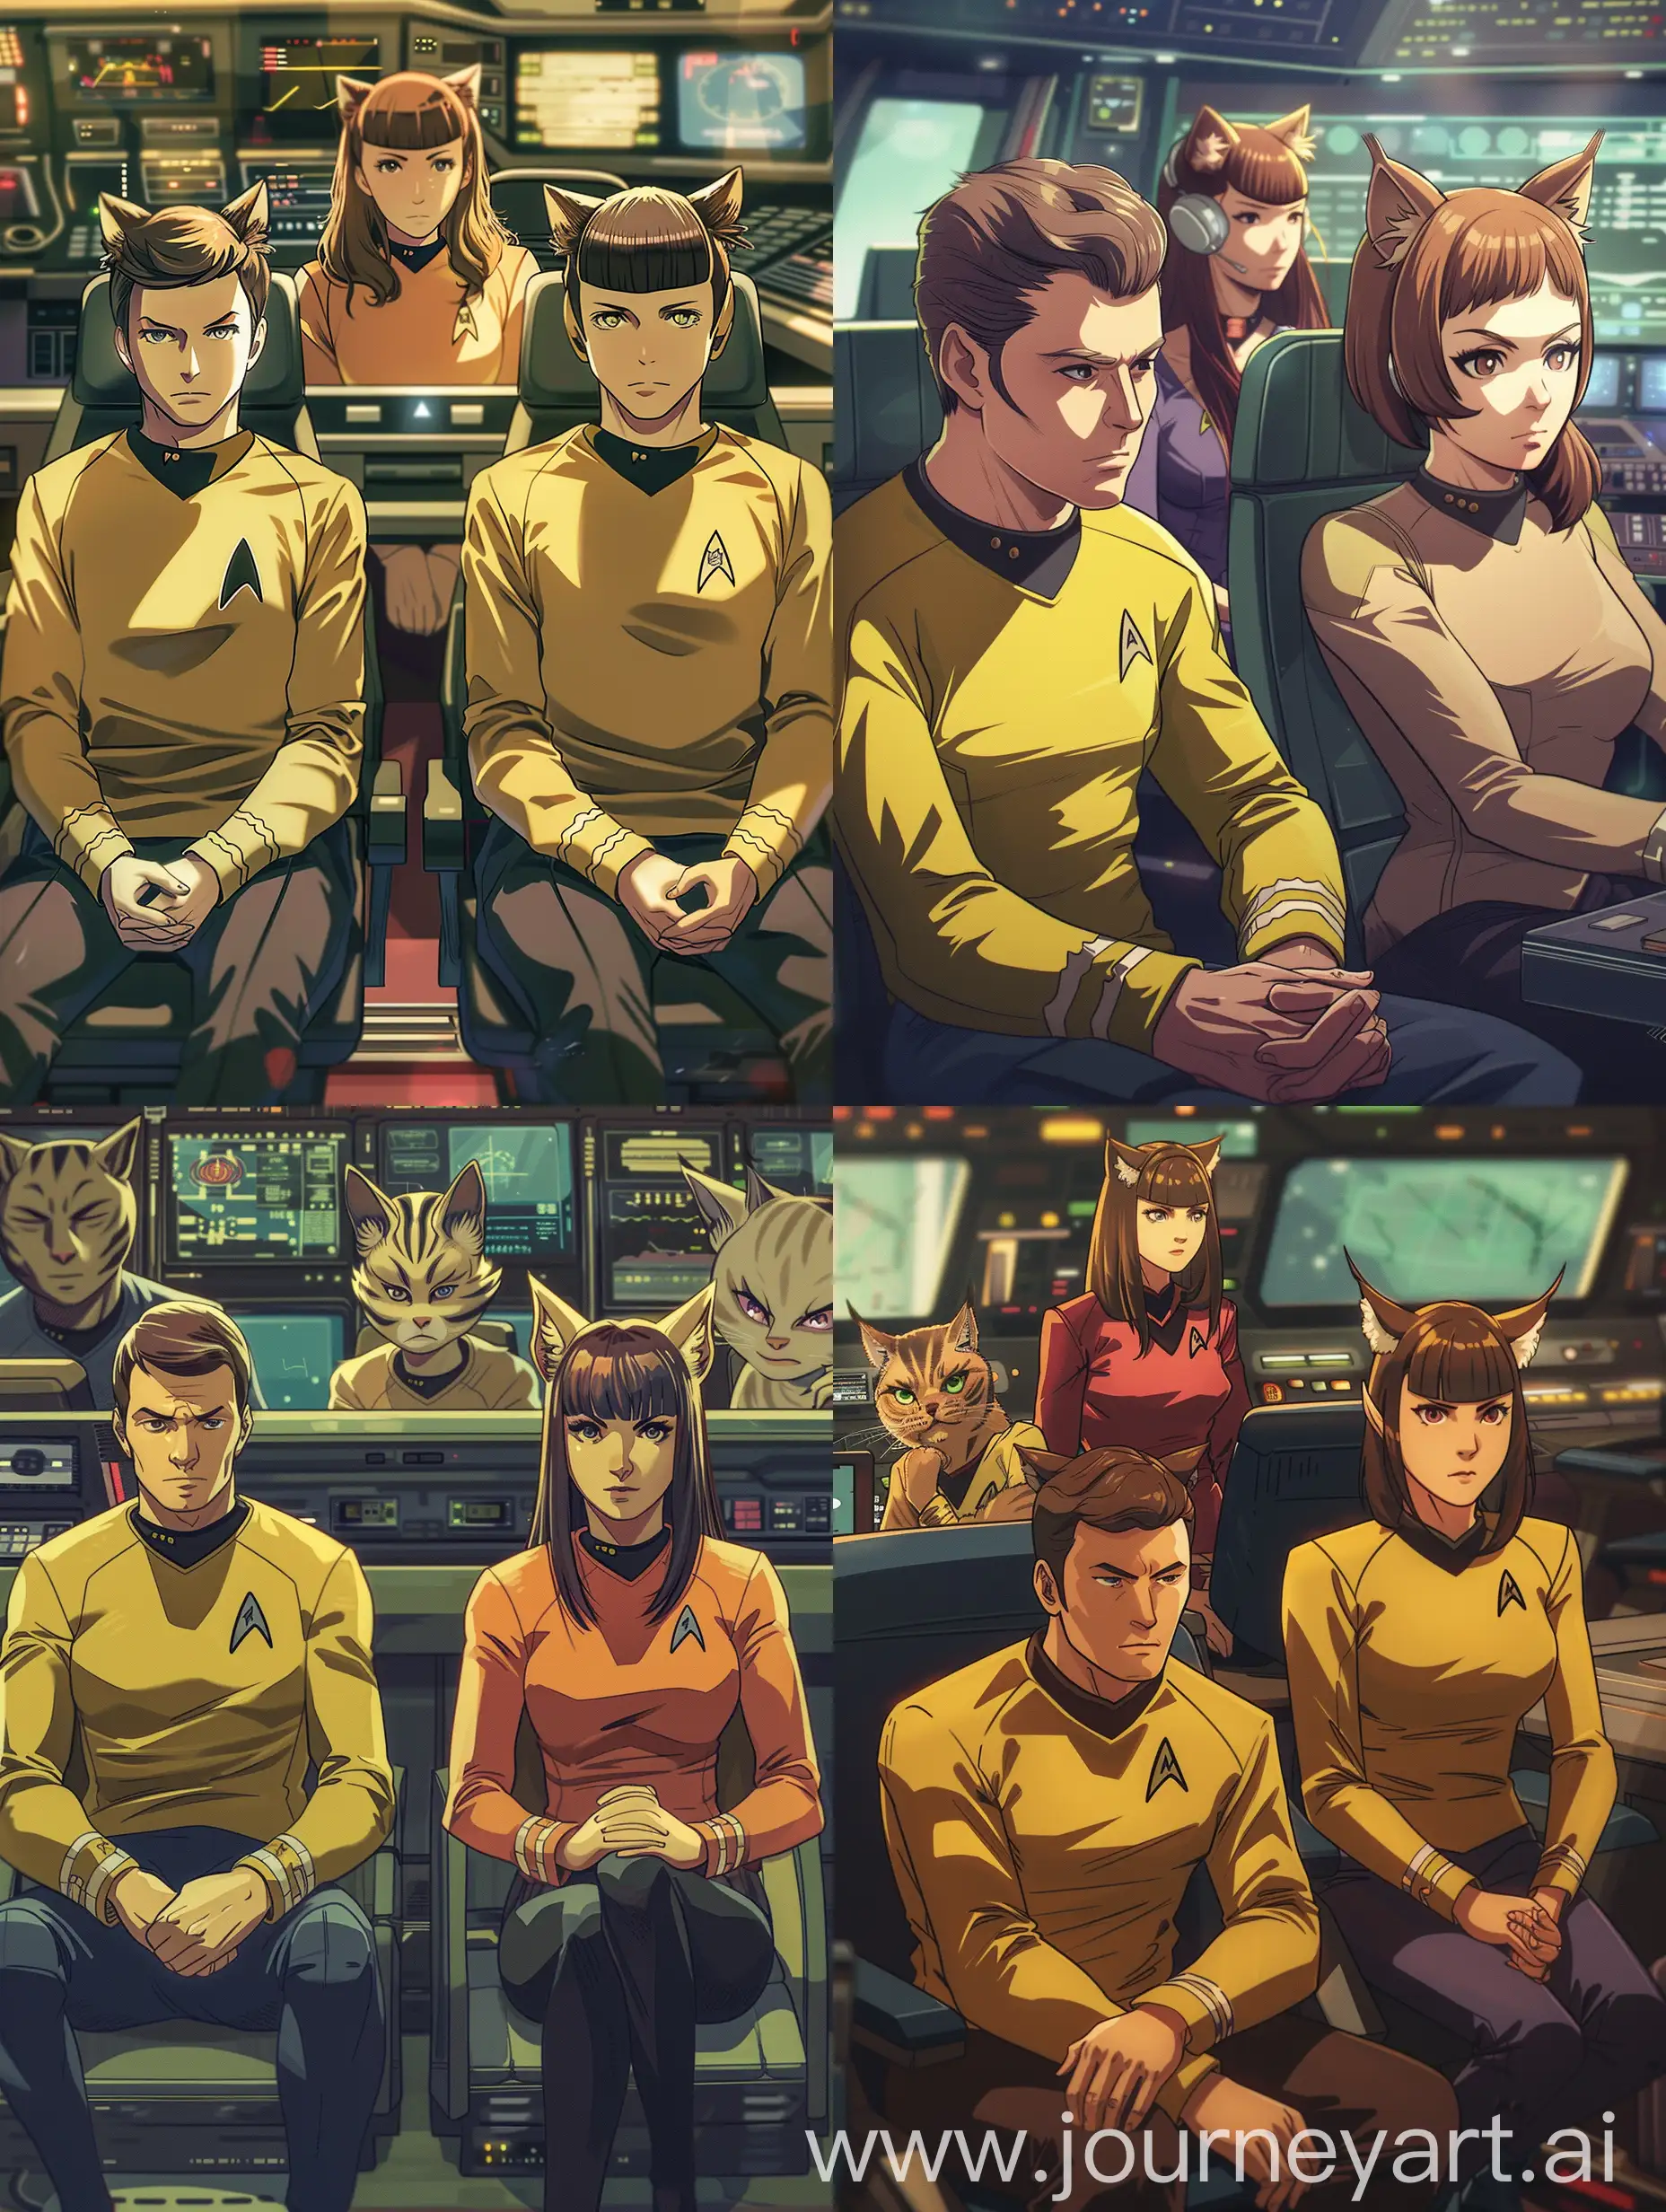 Young-AnimeStyled-Captain-Kirk-Spock-and-McCoy-with-Catgirl-Uhura-on-USS-Enterprise-Bridge